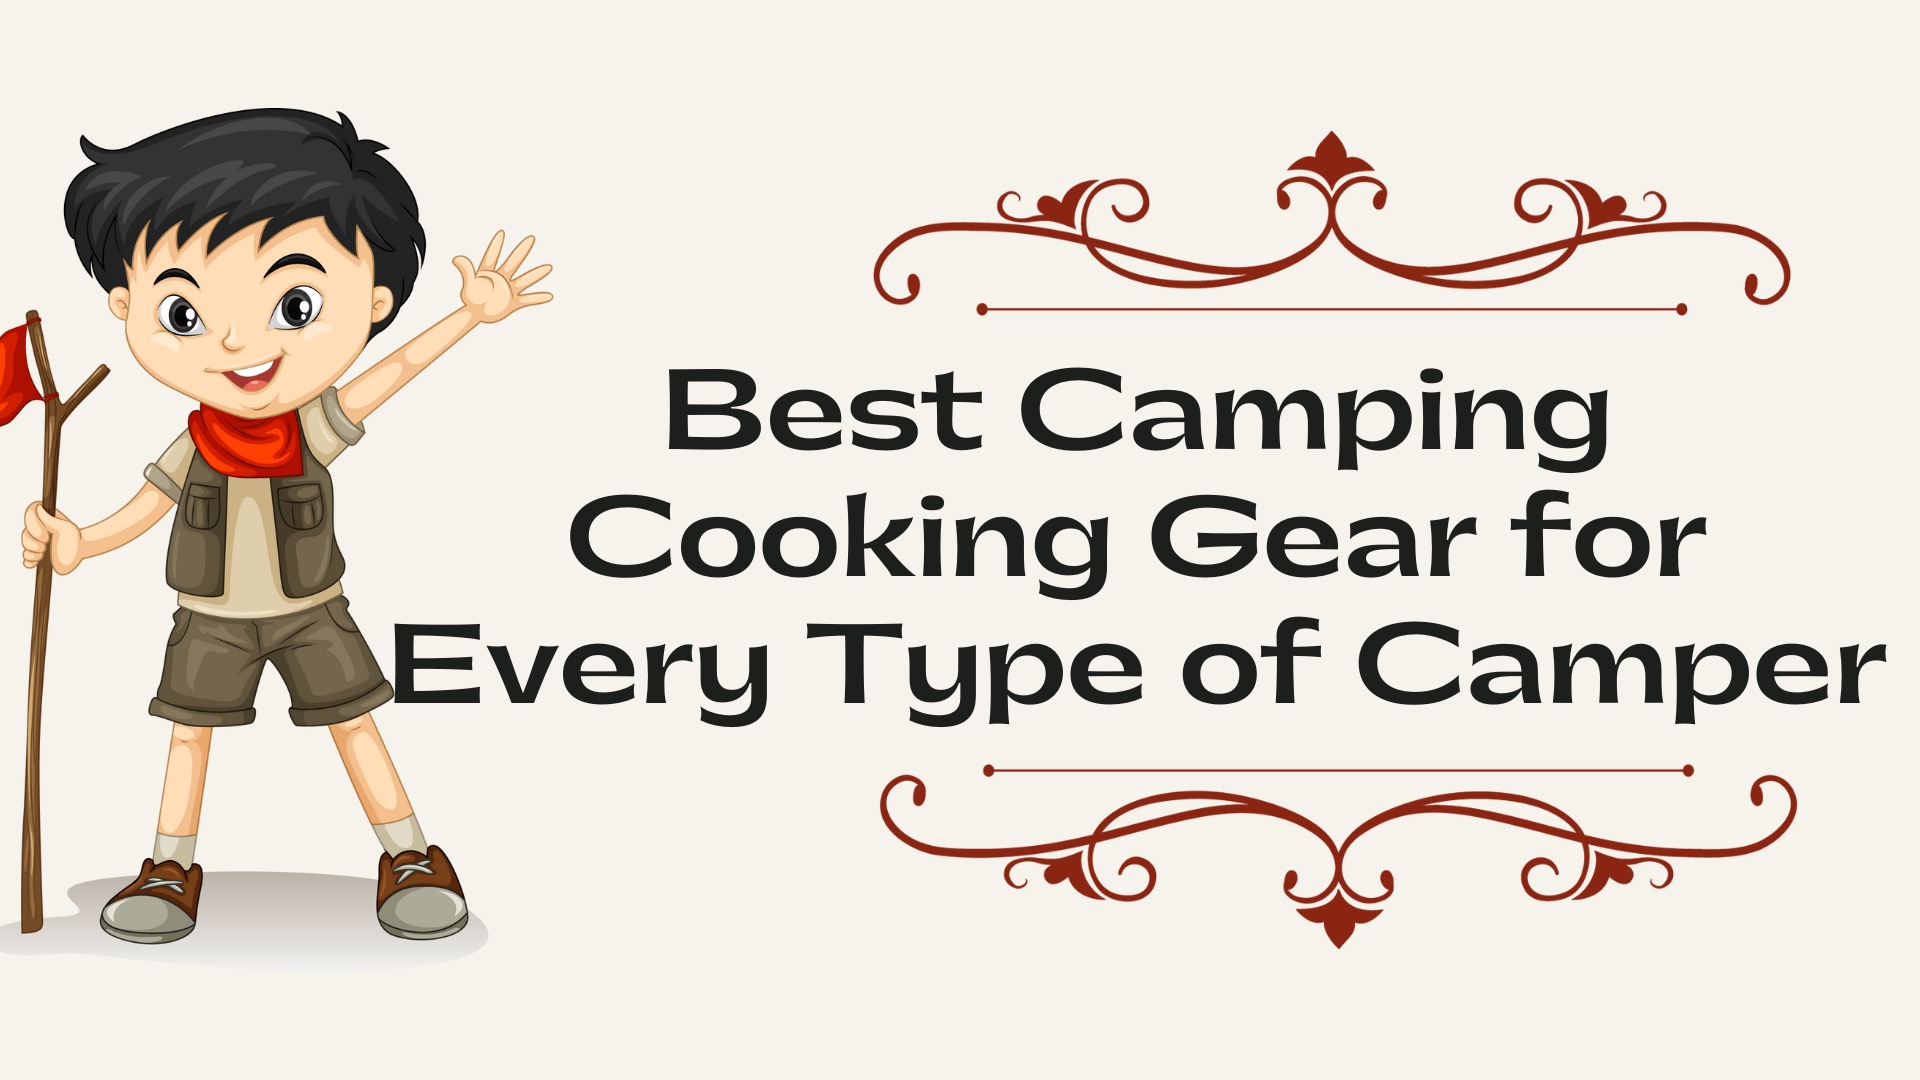 Best Camping Cooking Gear for Every Type of Camper